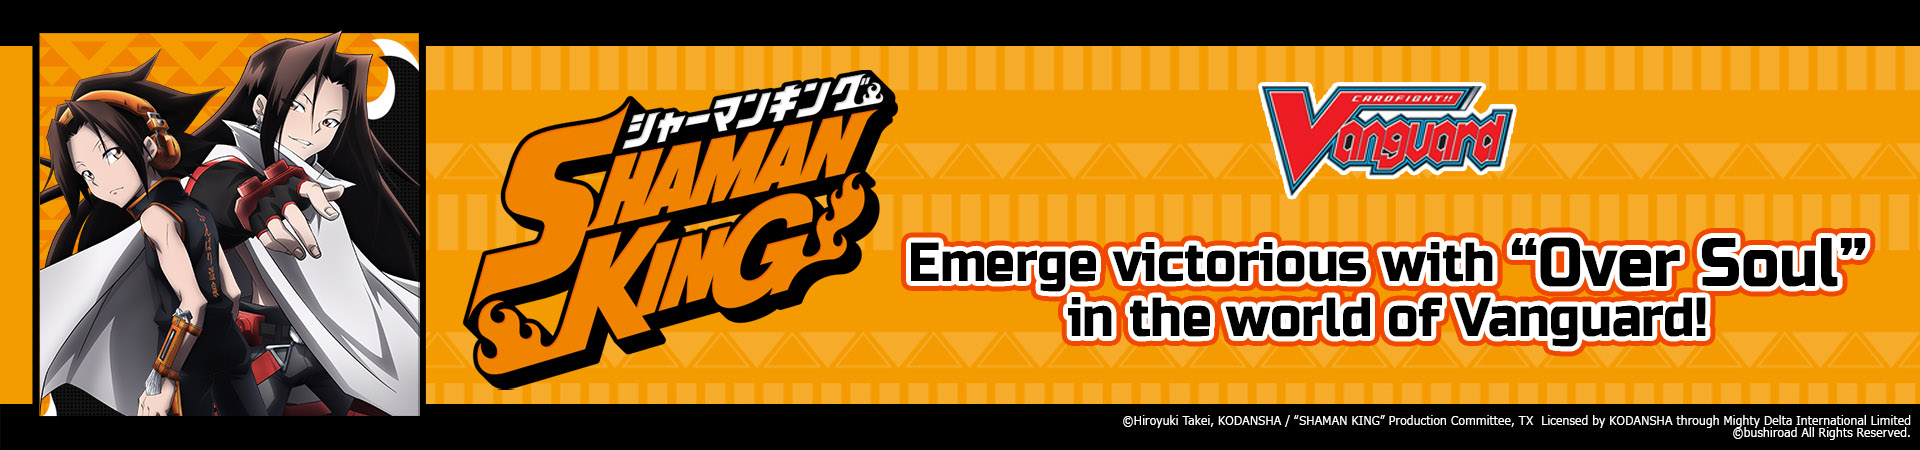 SHAMAN KING: Emerge victorious with “Over Soul” in the world of Vanguard!